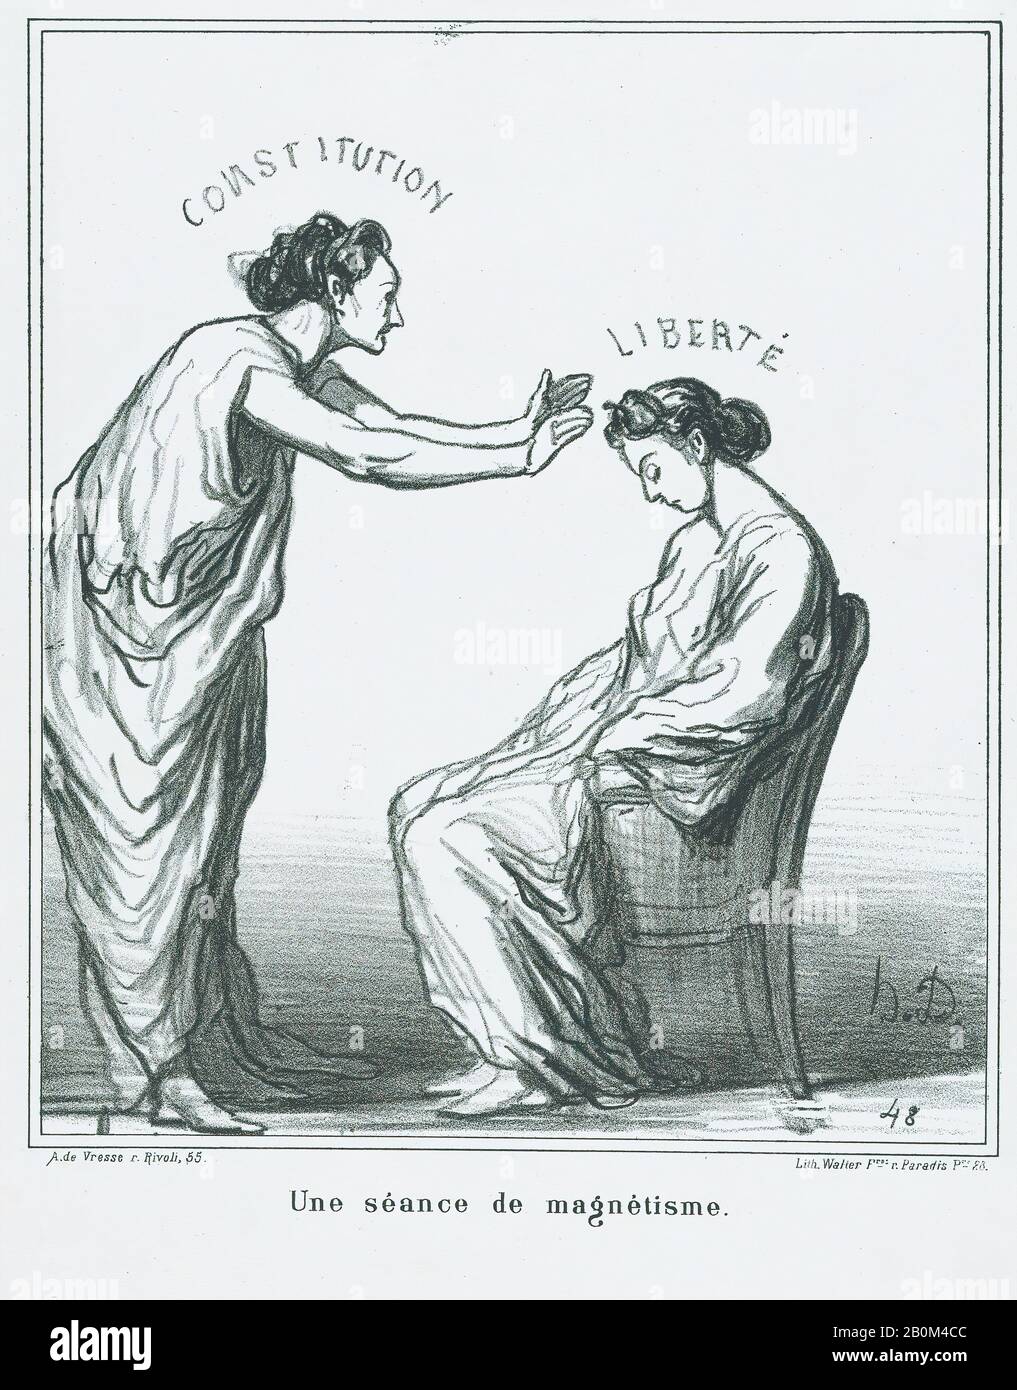 Honoré Daumier, A session of hypnotism, from 'News of the day,' published in Le Charivari, August 31, 1869, 'News of the day' (Actualités), Honoré Daumier (French, Marseilles 1808–1879 Valmondois), August 31, 1869, Lithograph on wove paper; second state of two (Delteil), Image: 9 7/16 × 8 1/16 in. (24 × 20.5 cm), Sheet: 14 1/4 × 10 1/2 in. (36.2 × 26.6 cm), Prints Stock Photo